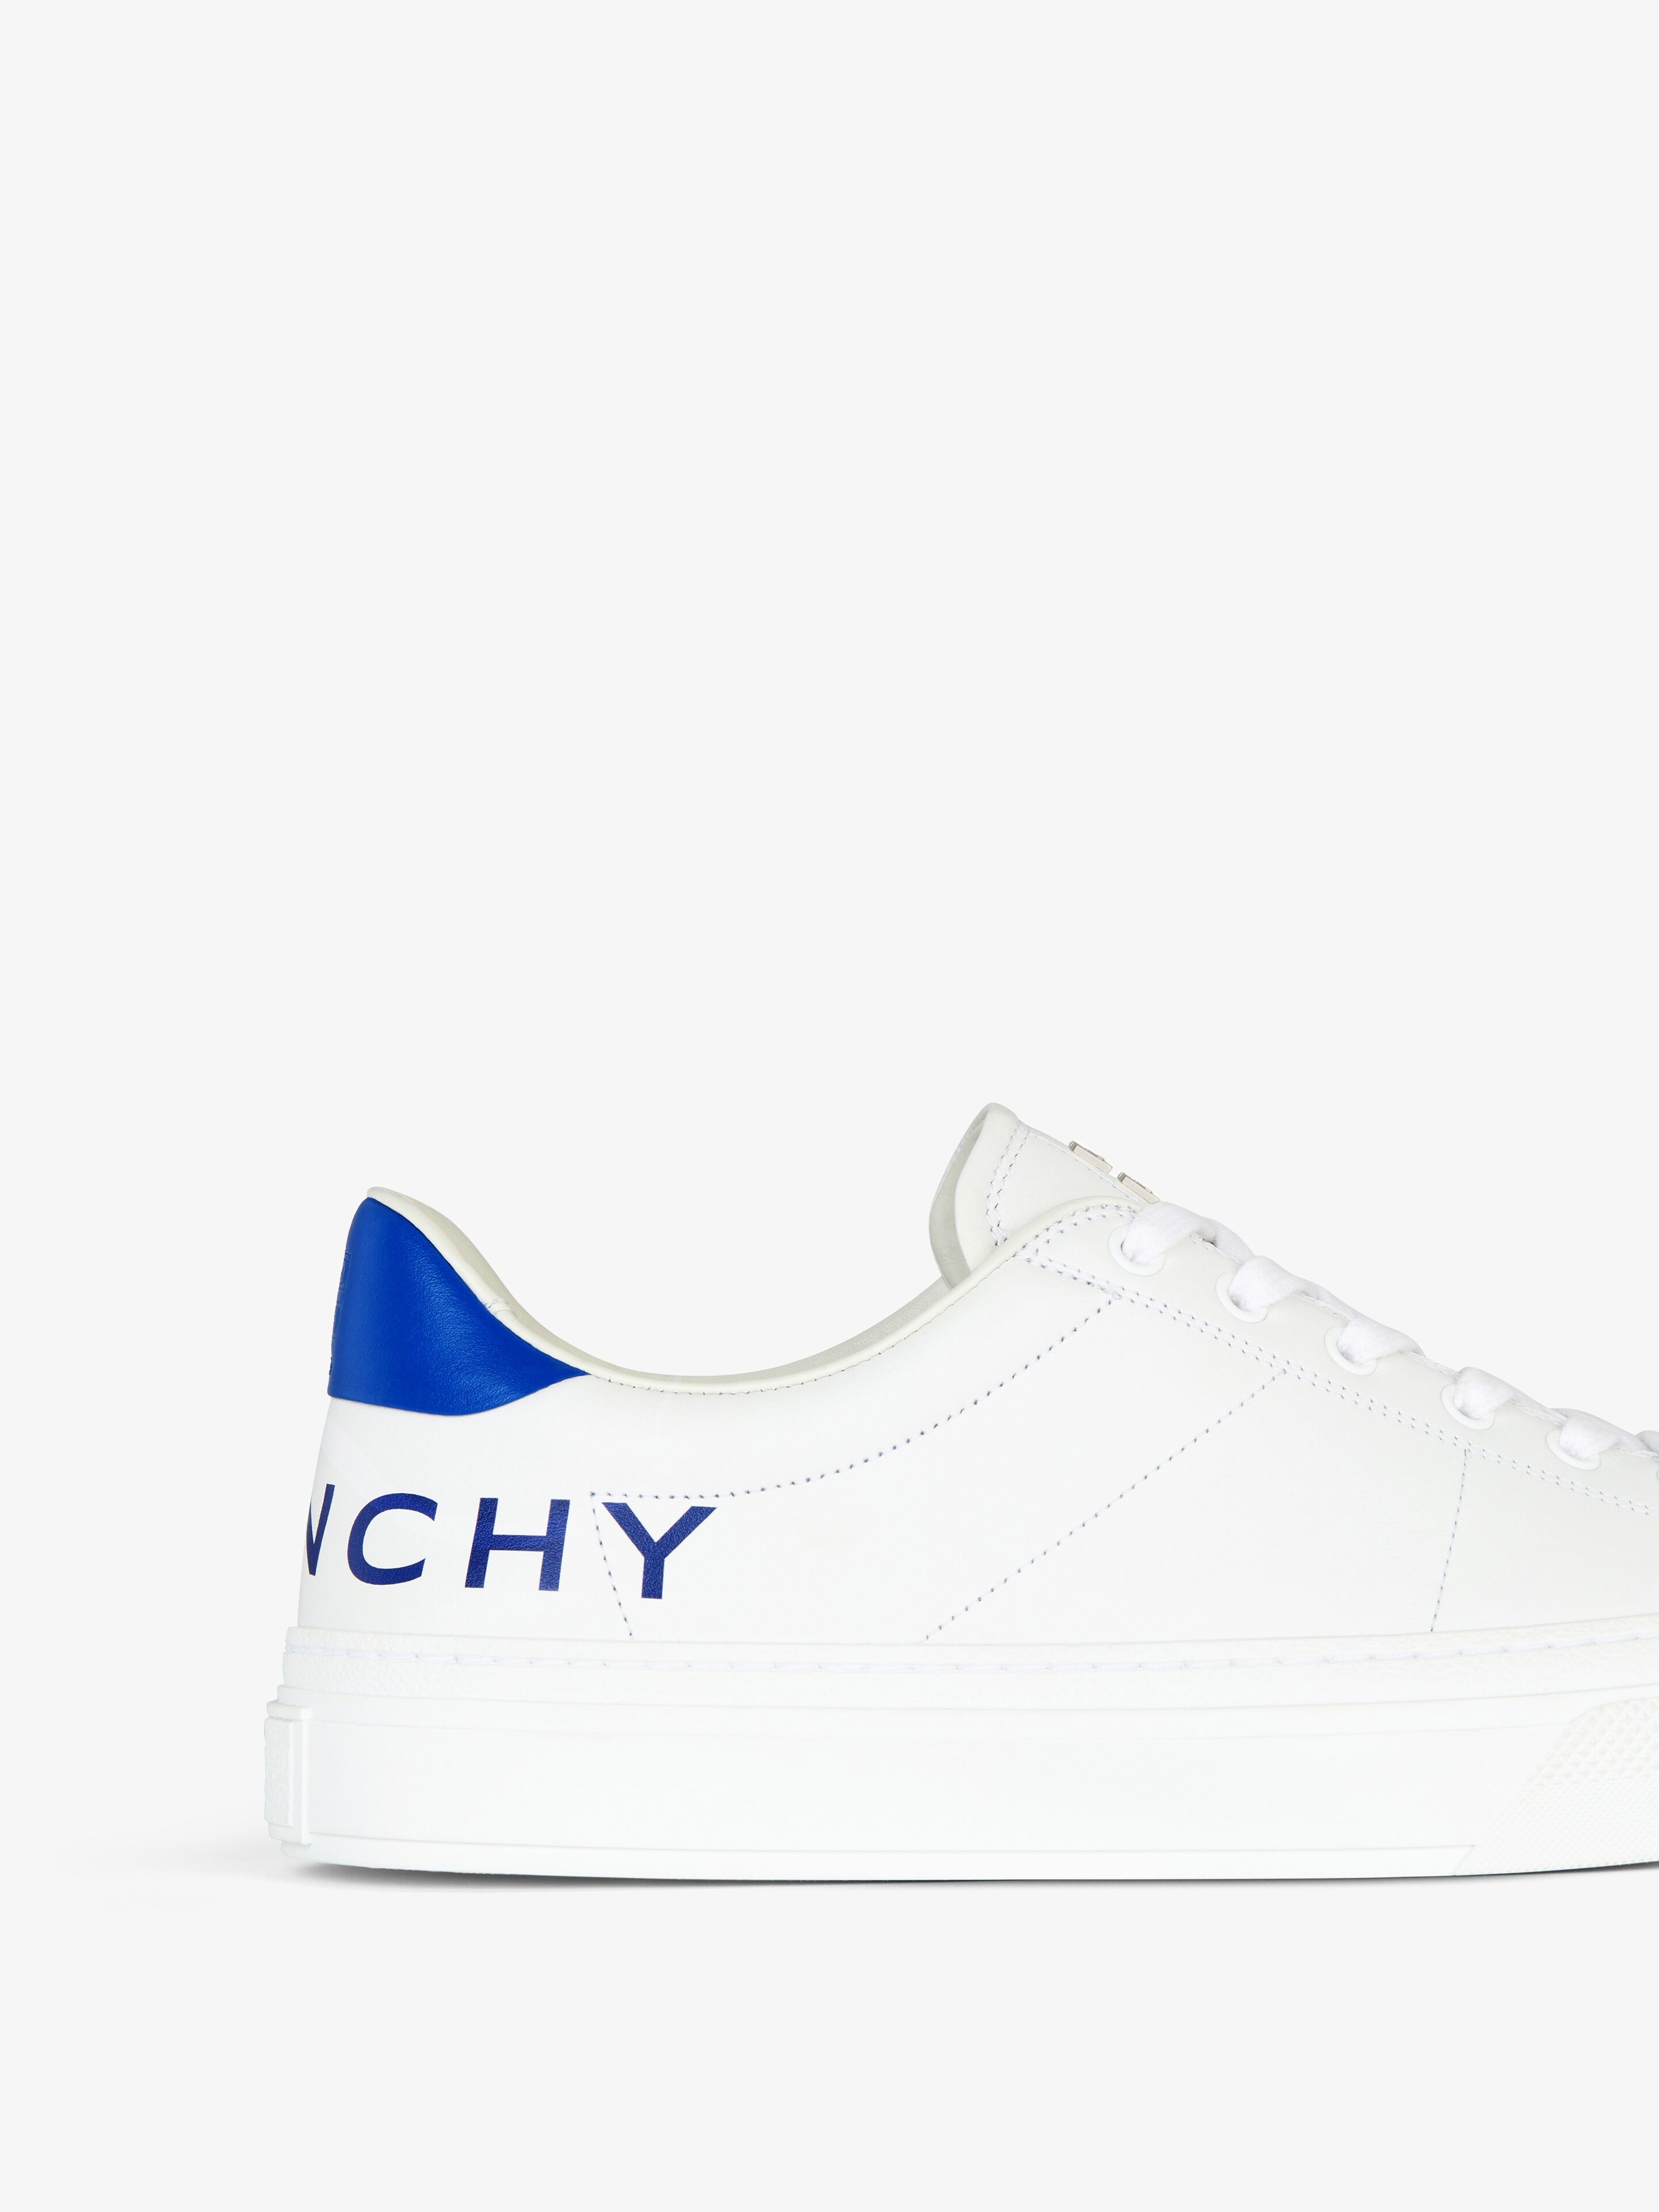 GIVENCHY CITY SPORT SNEAKERS IN LEATHER - 6